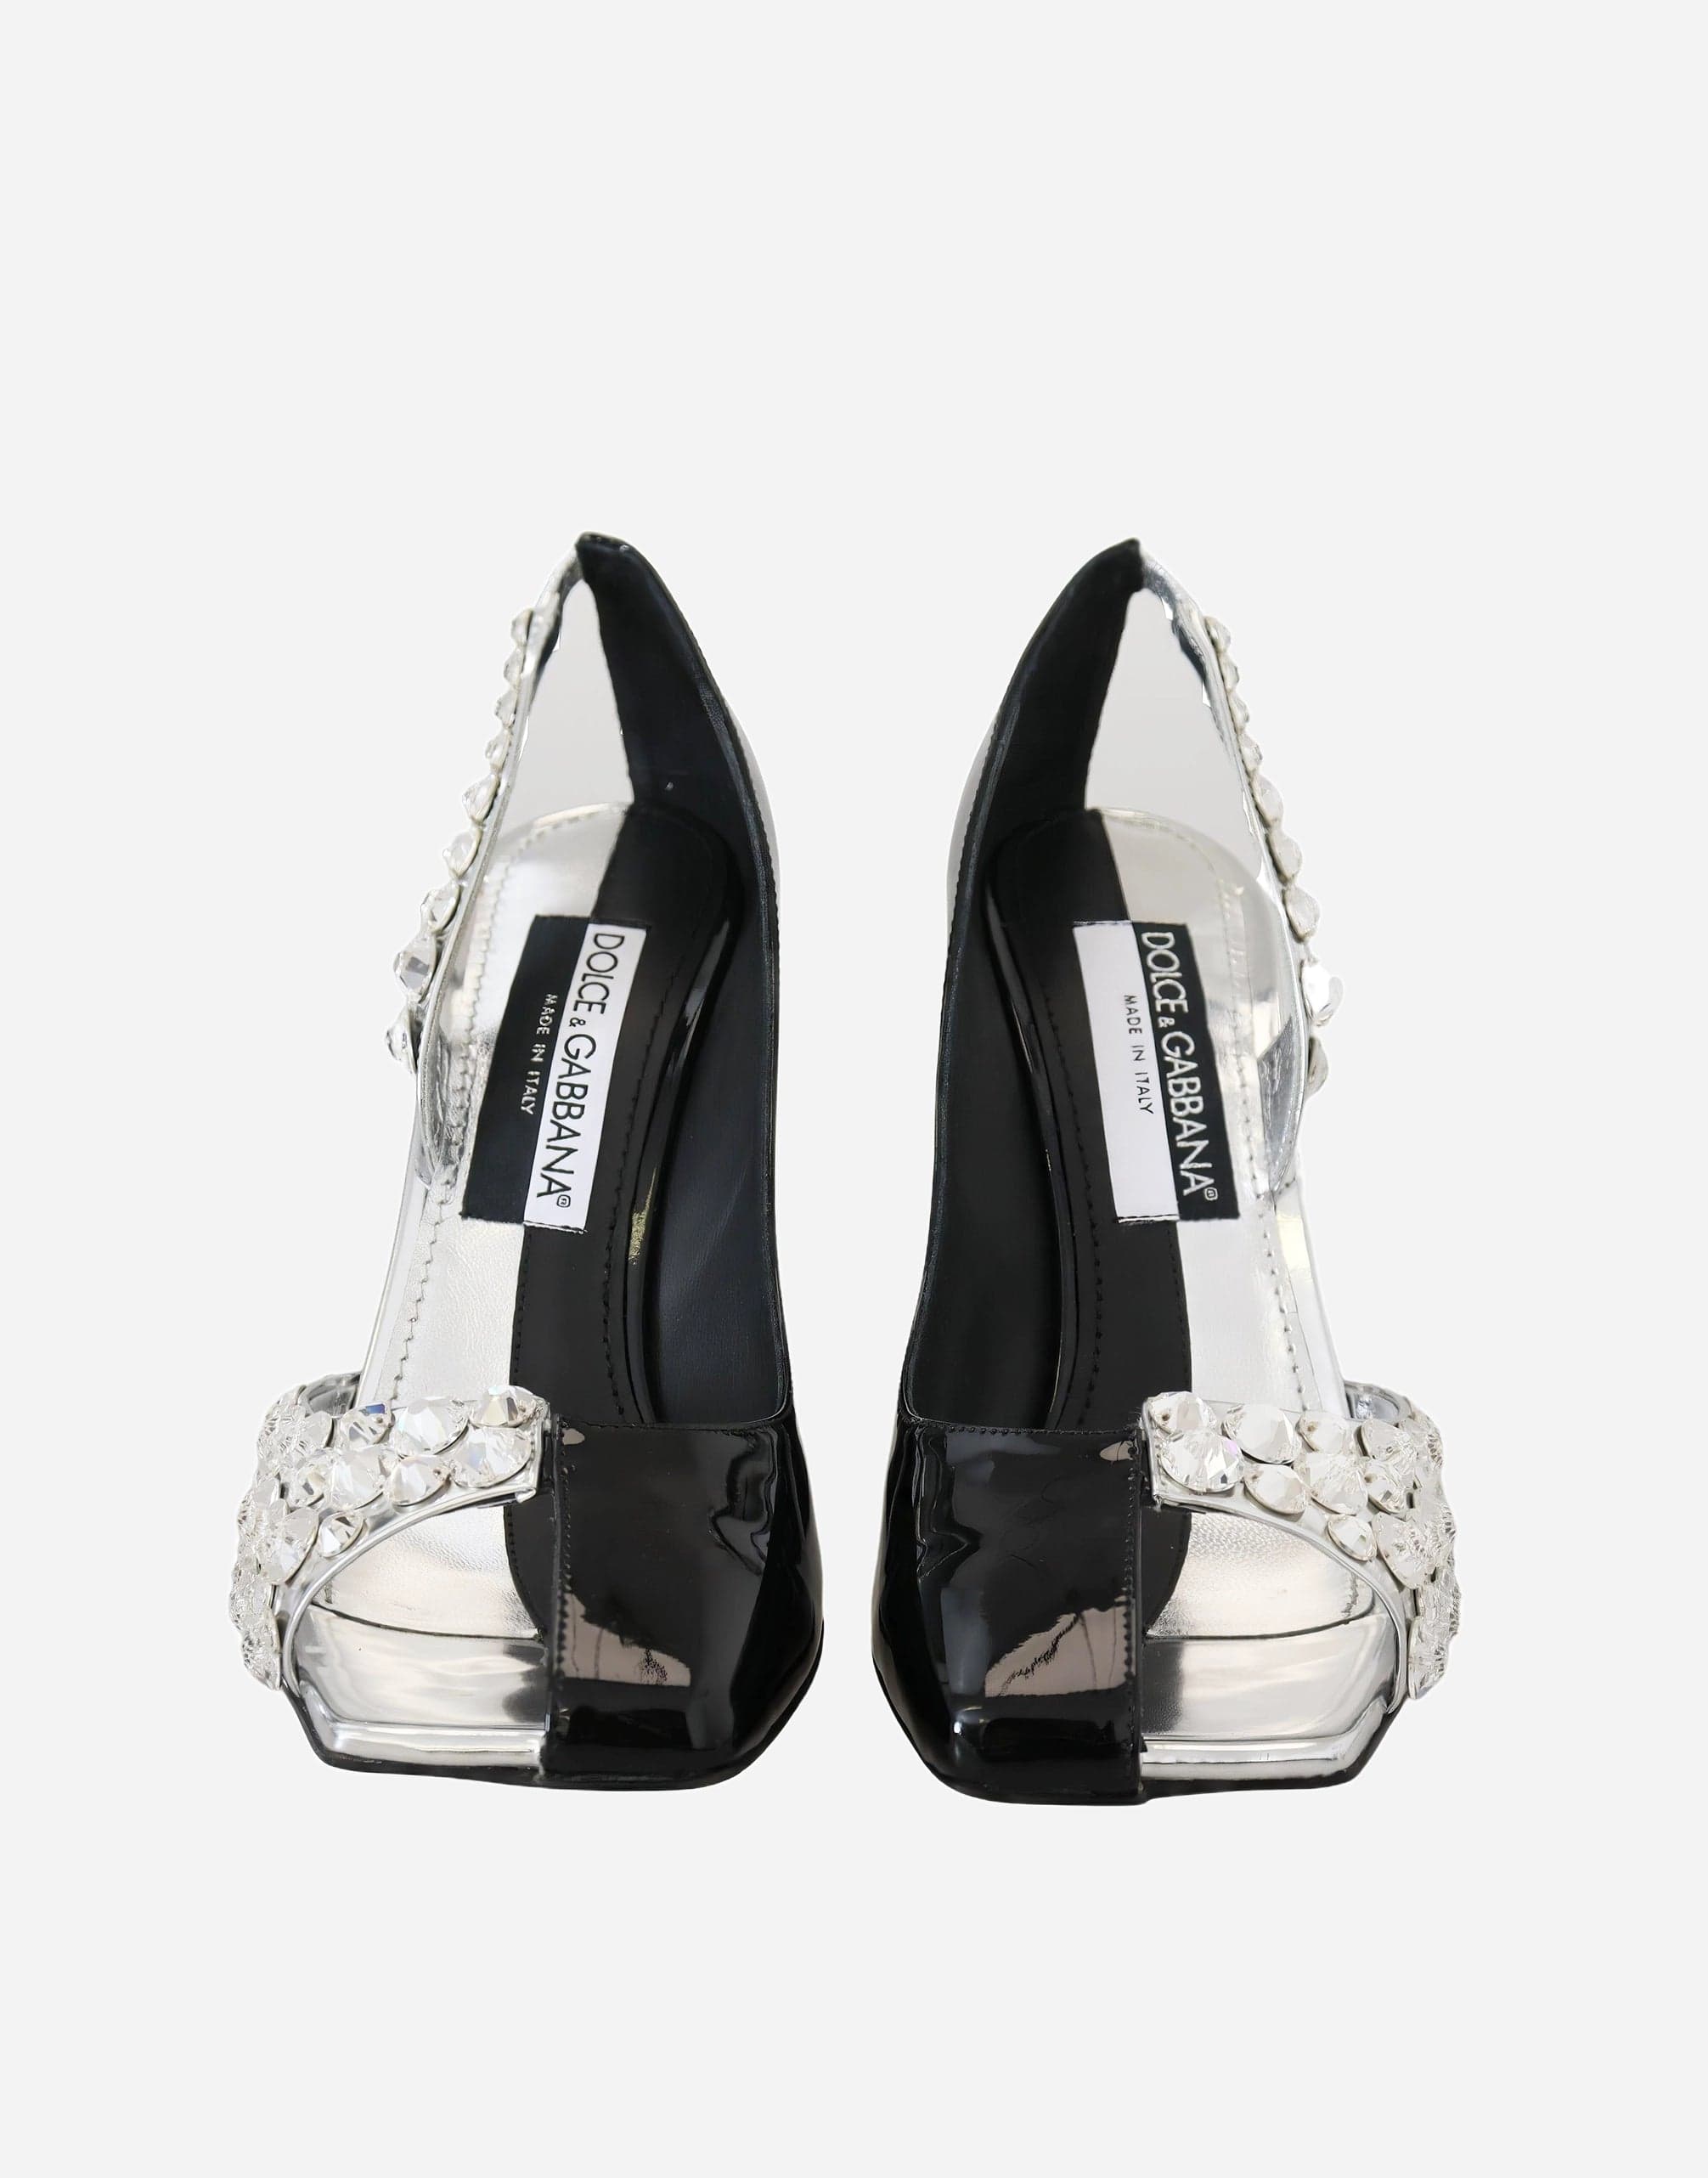 Dolce & Gabbana Black Silver Crystal Double Design High Heels Shoes